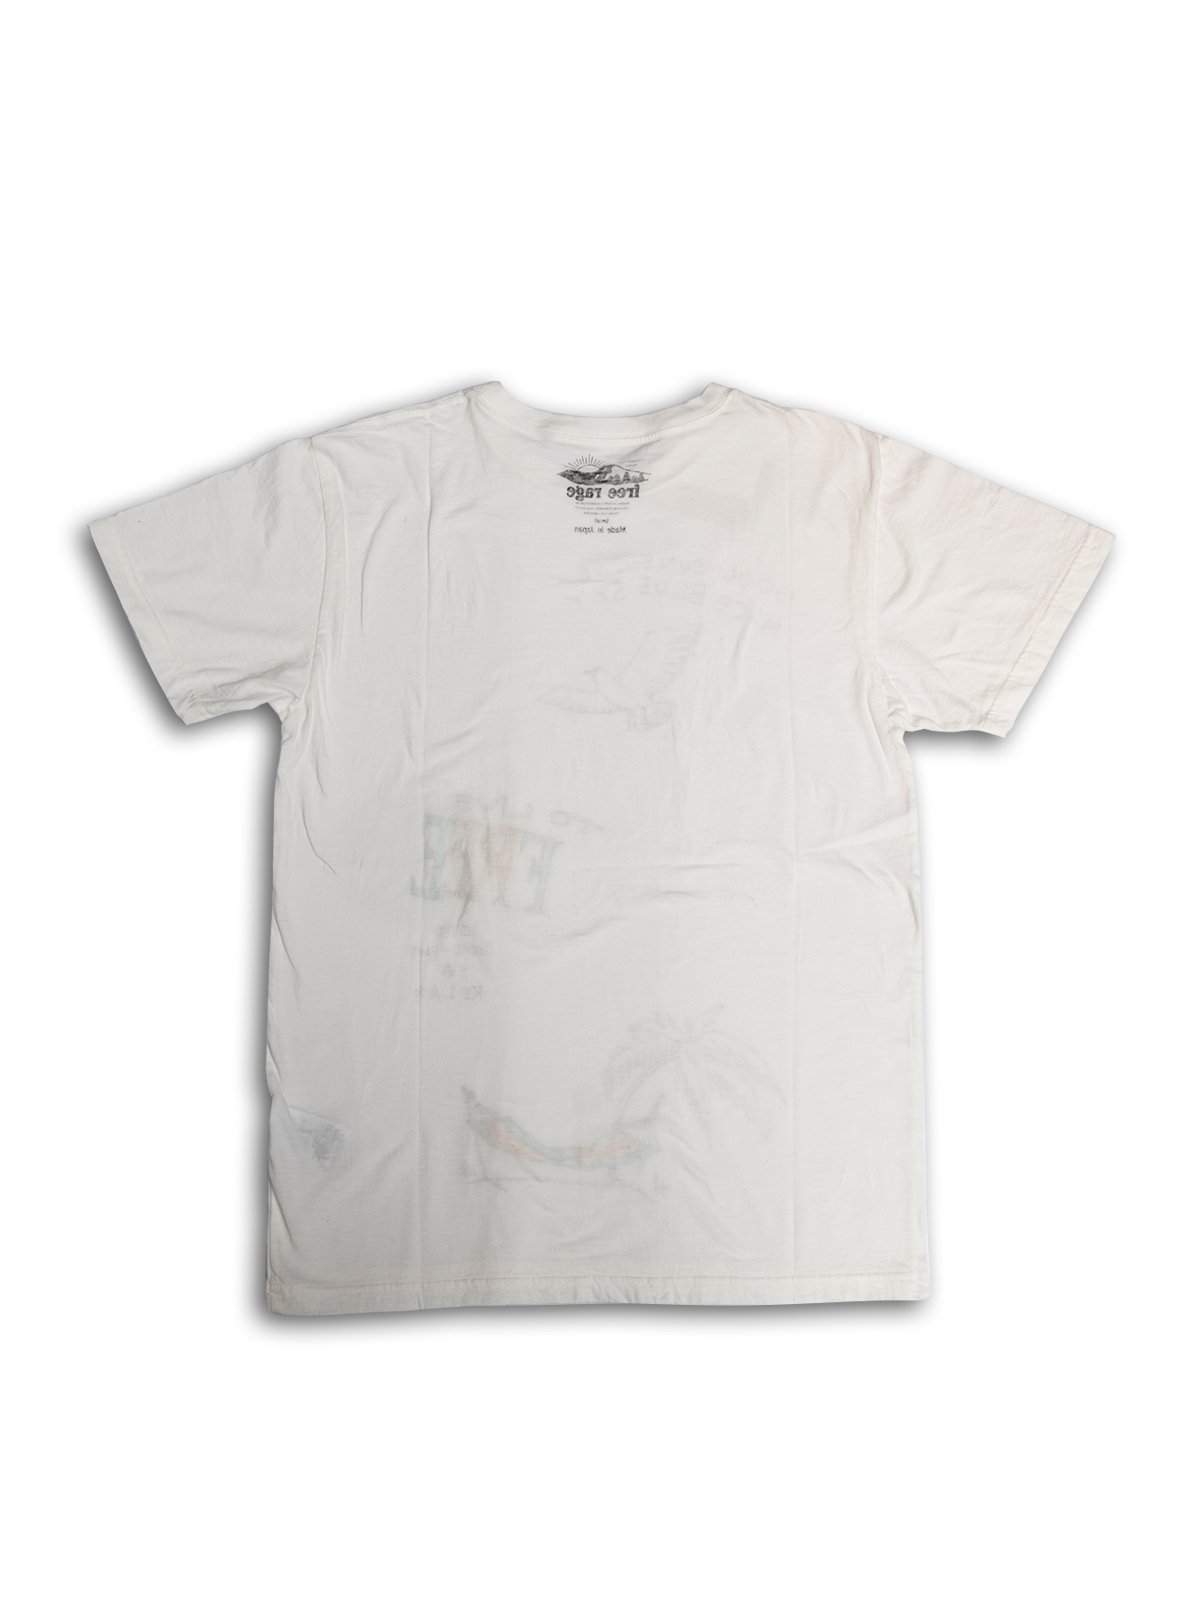 Free Rage Recycled Cotton Tee Hand Paint Live Free White - MORE by Morello Indonesia